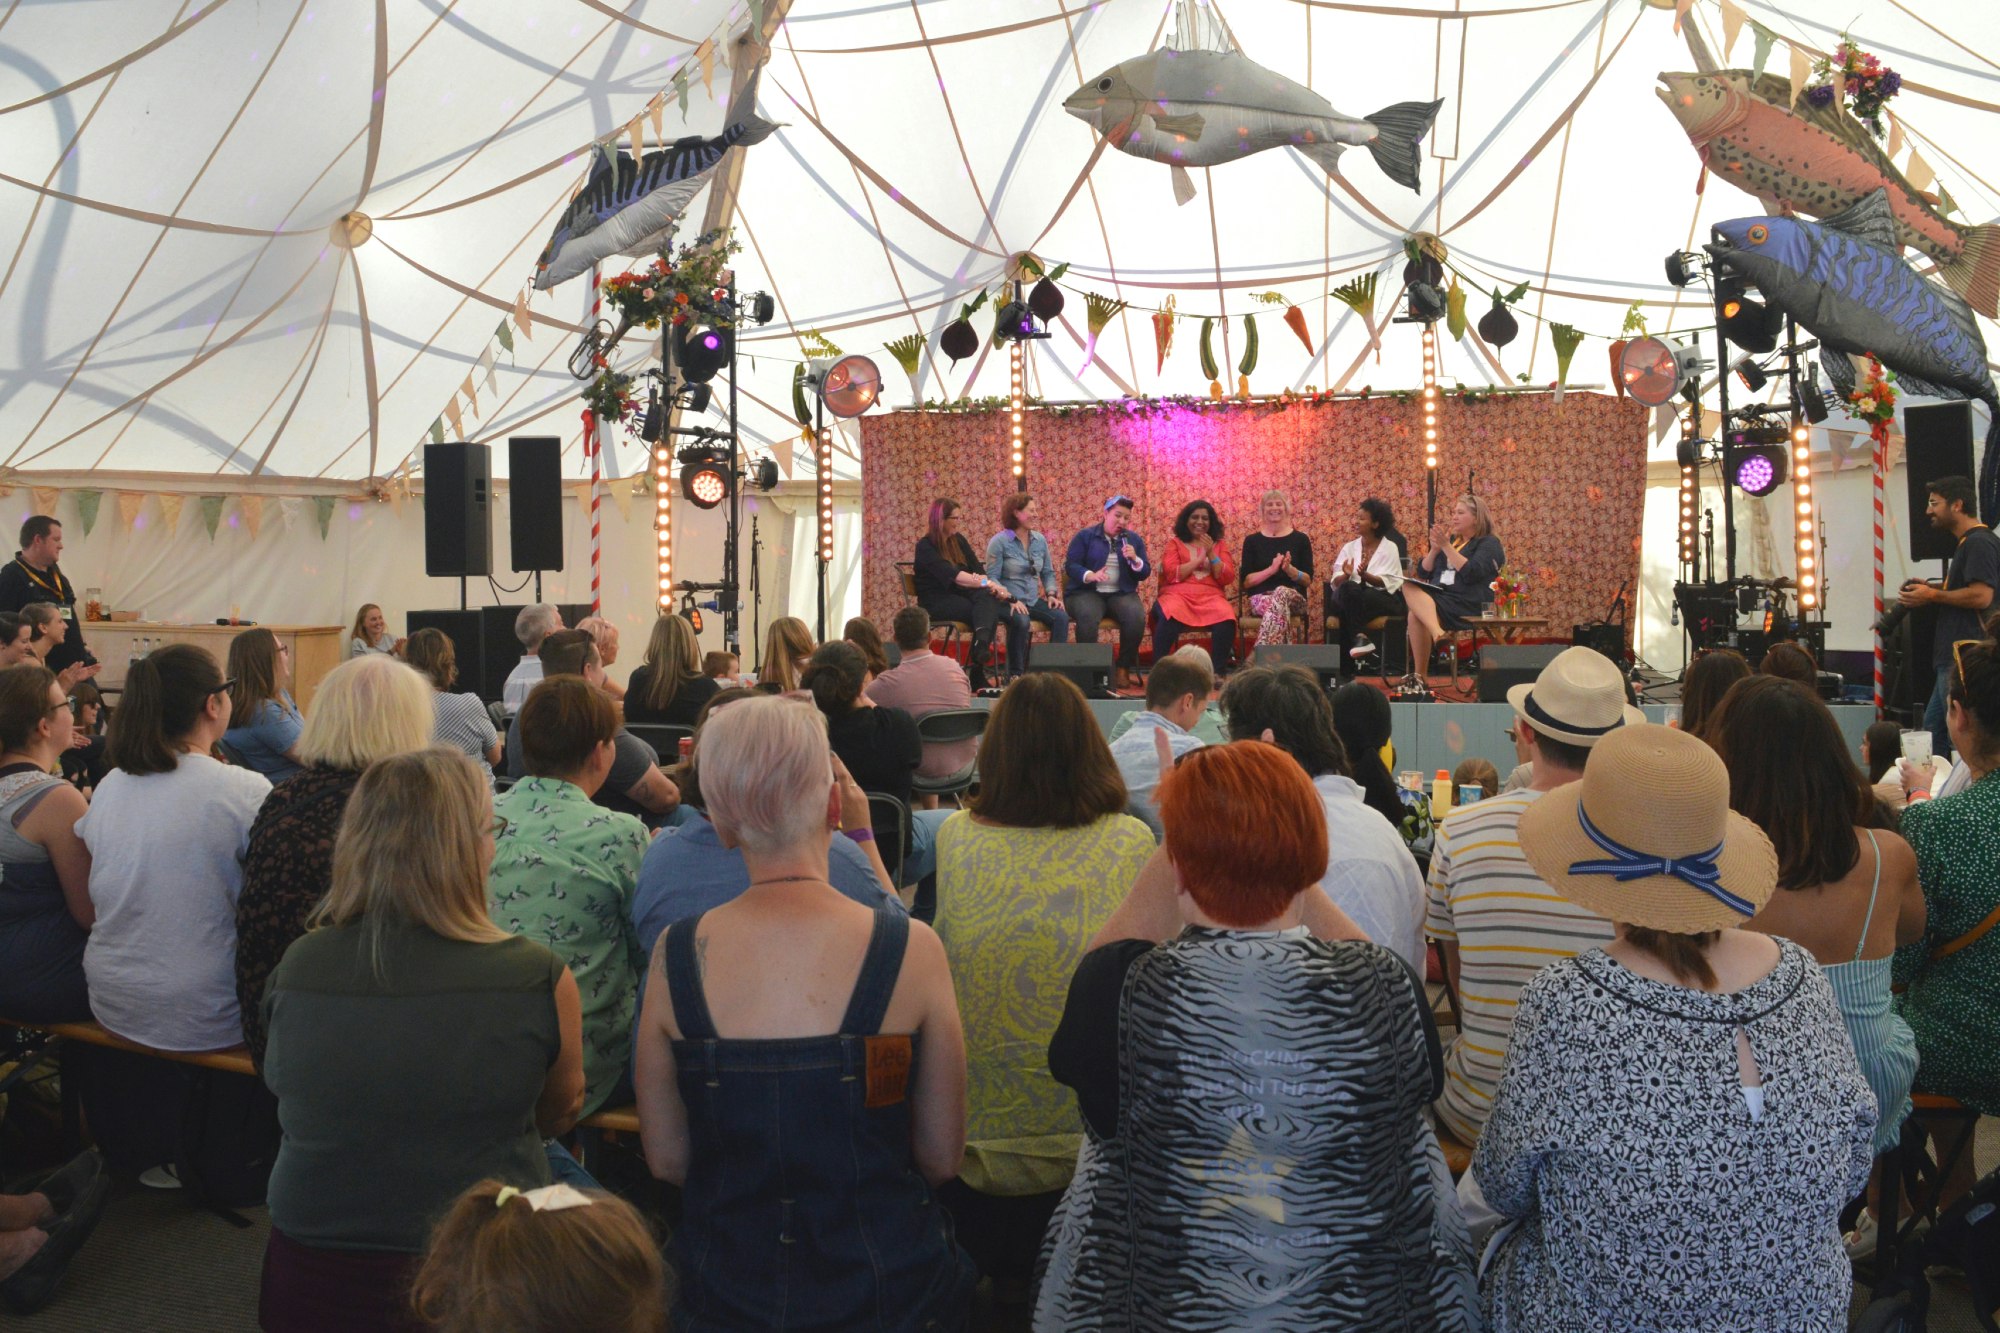 A panel of speakers on a stage address a crowd inside a bell tent.